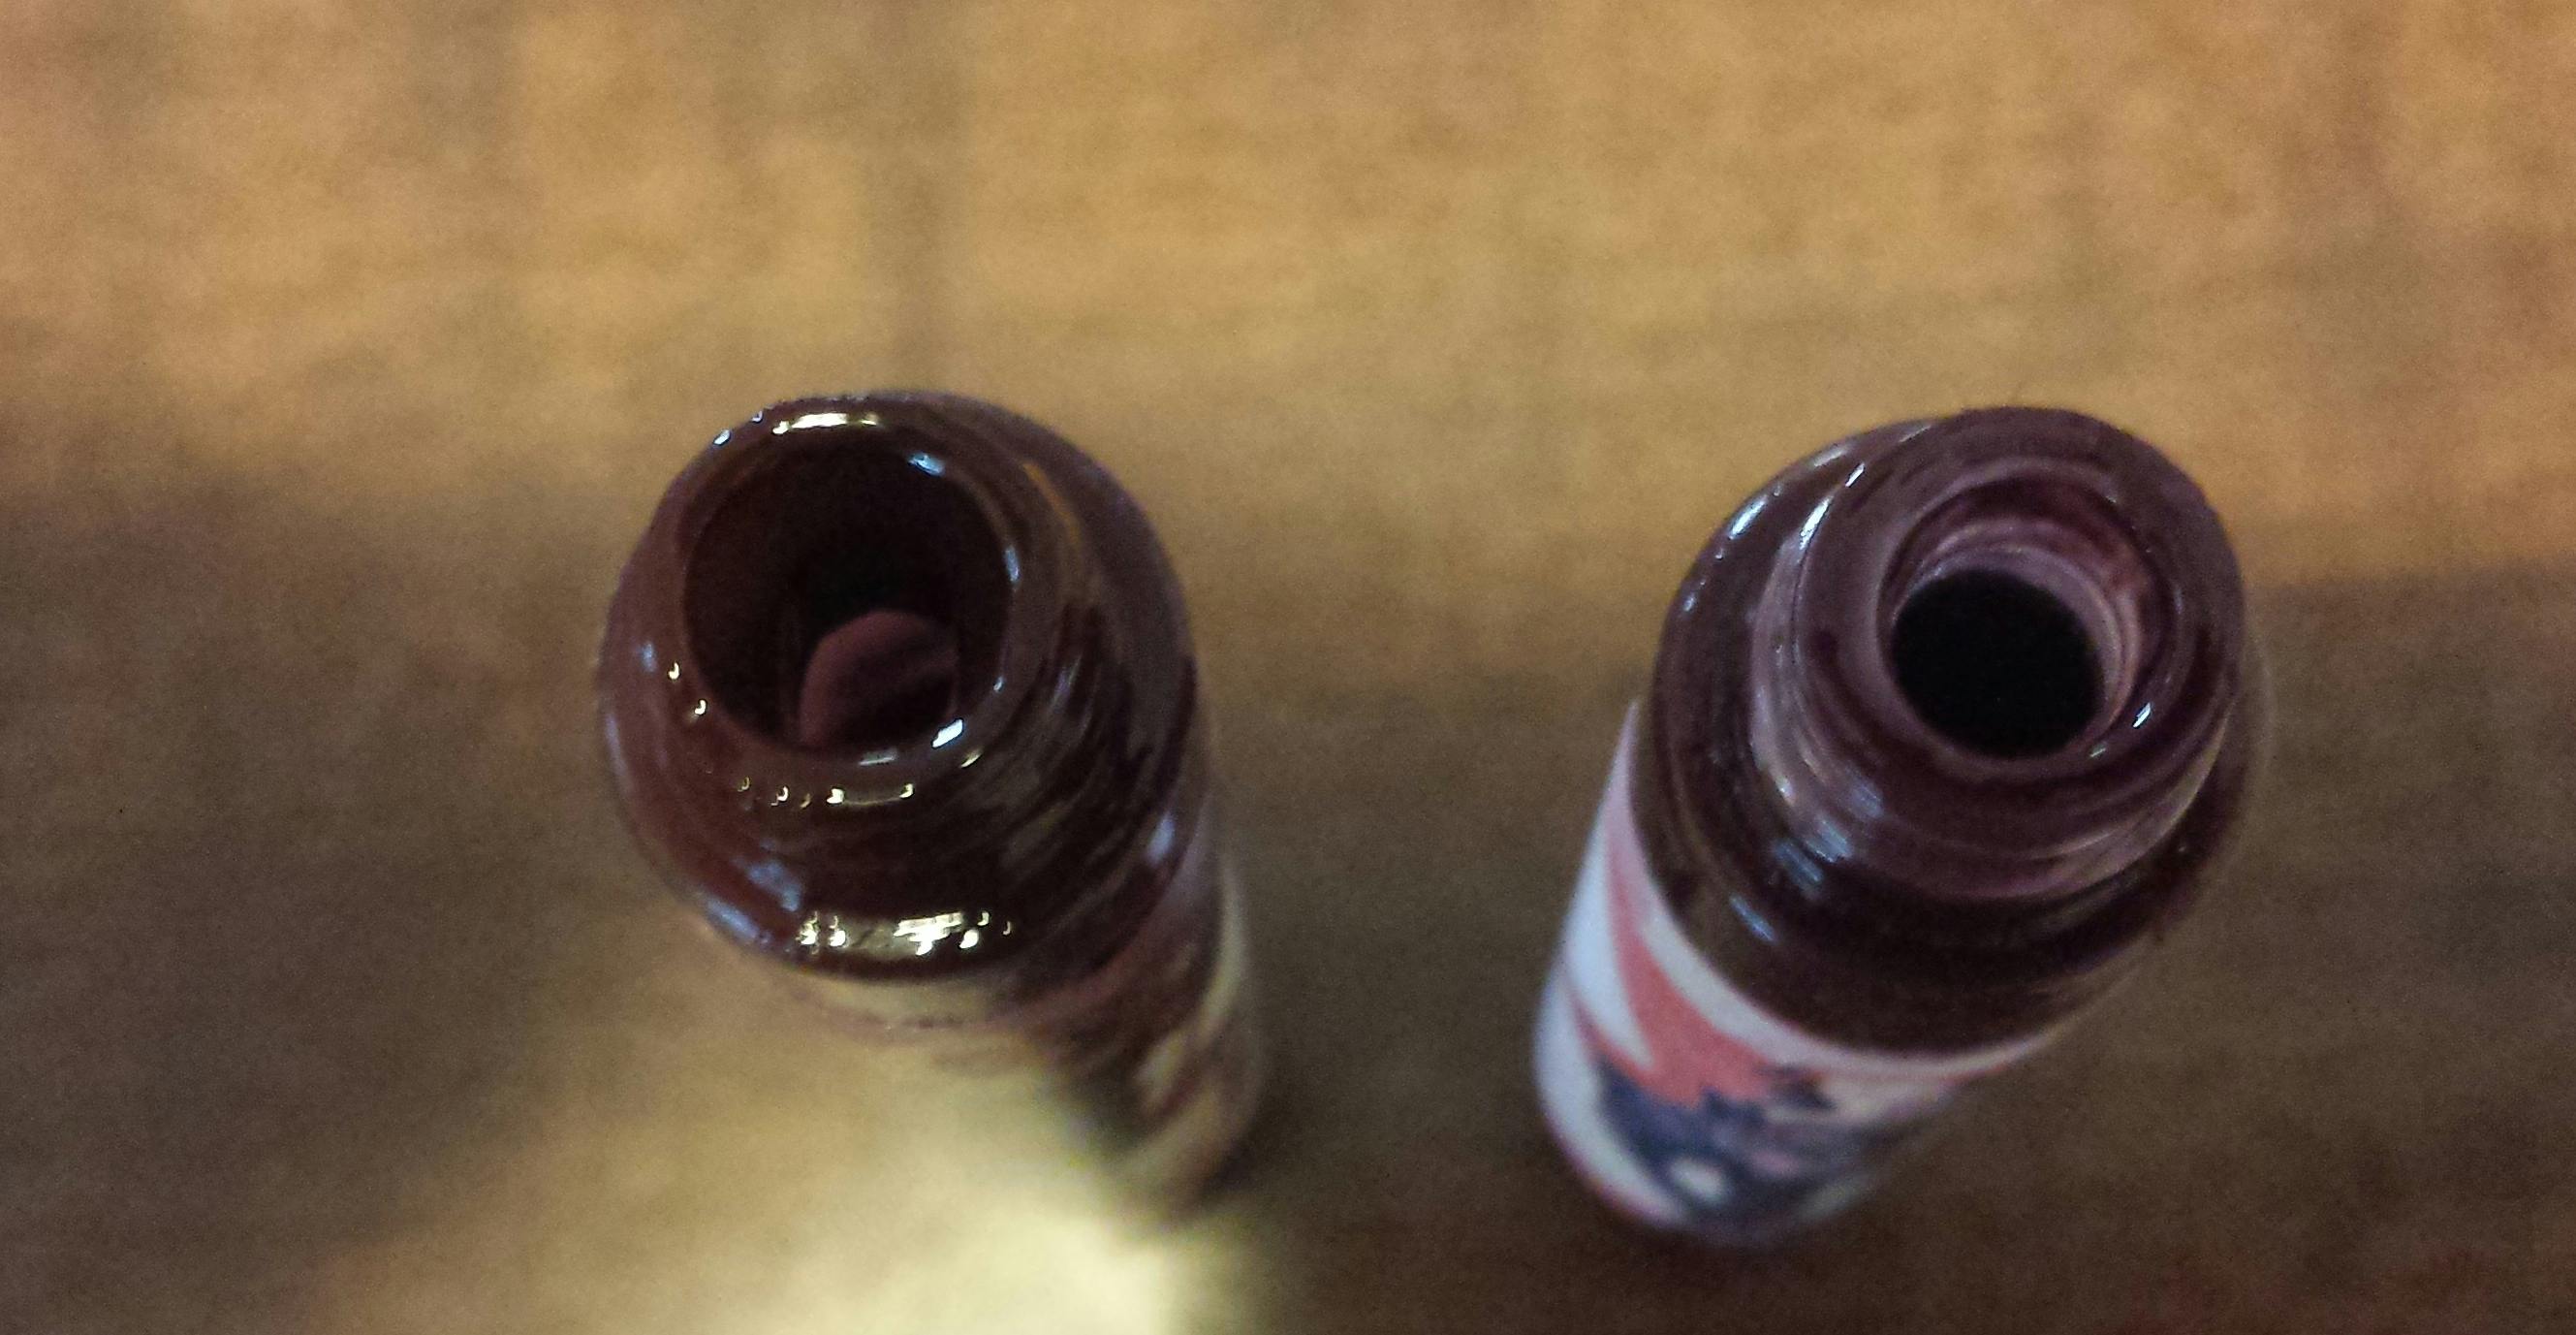 Original gloss without a stopper (left). The new gloss with the stopper included (right).